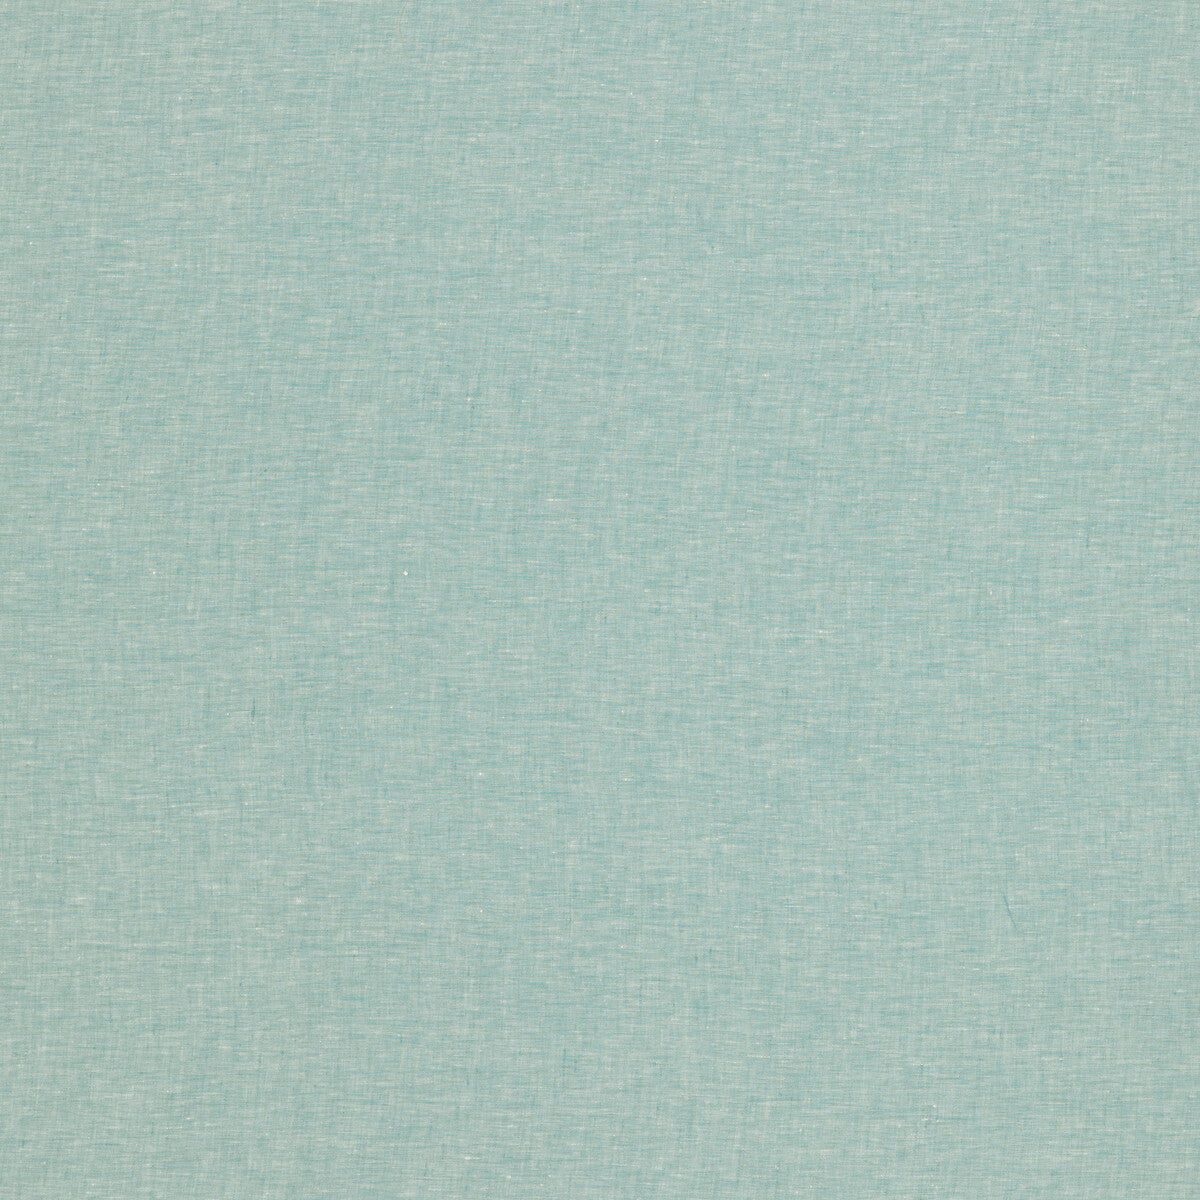 Nala Linen fabric in aqua color - pattern ED85329.725.0 - by Threads in the Nala Linens collection